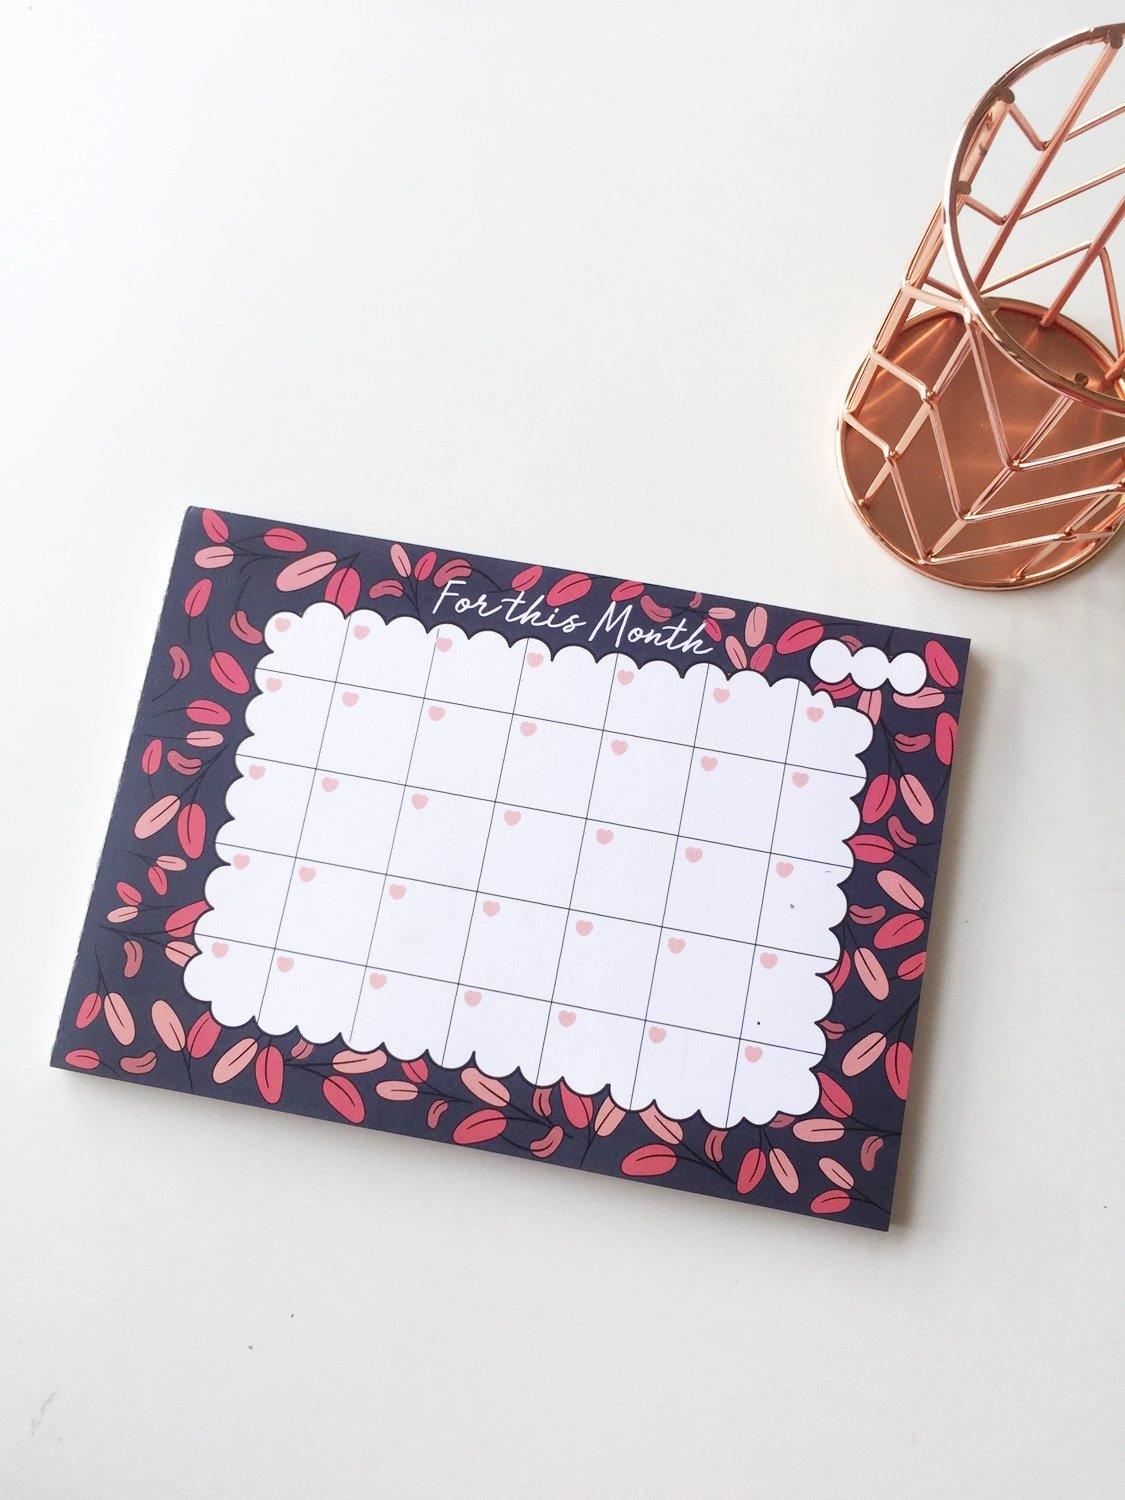 Autumn Feels To Do/ Daily/ Weekly/Monthly Planners | A5 Size | 50 sheets each - Supple Room